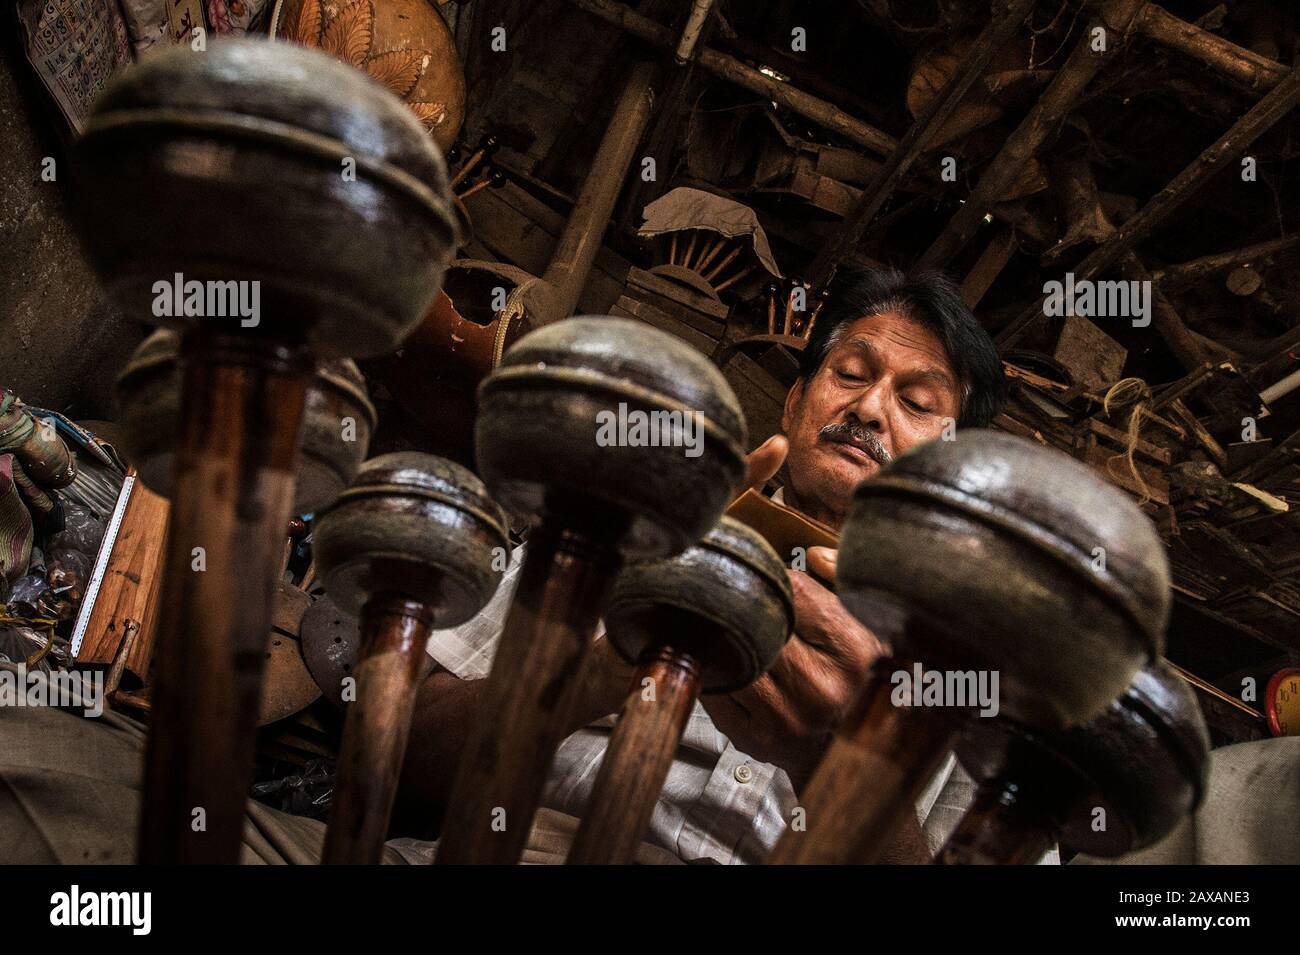 Kolkata, India. 11th Feb, 2020. An artisan makes string instruments for Indian classical music on the outskirts of Kolkata, India, on Feb. 11, 2020. Many string instruments in Indian classical music feature portions of natural material which give a special sound to the instruments. Credit: Tumpa Mondal/Xinhua/Alamy Live News Stock Photo